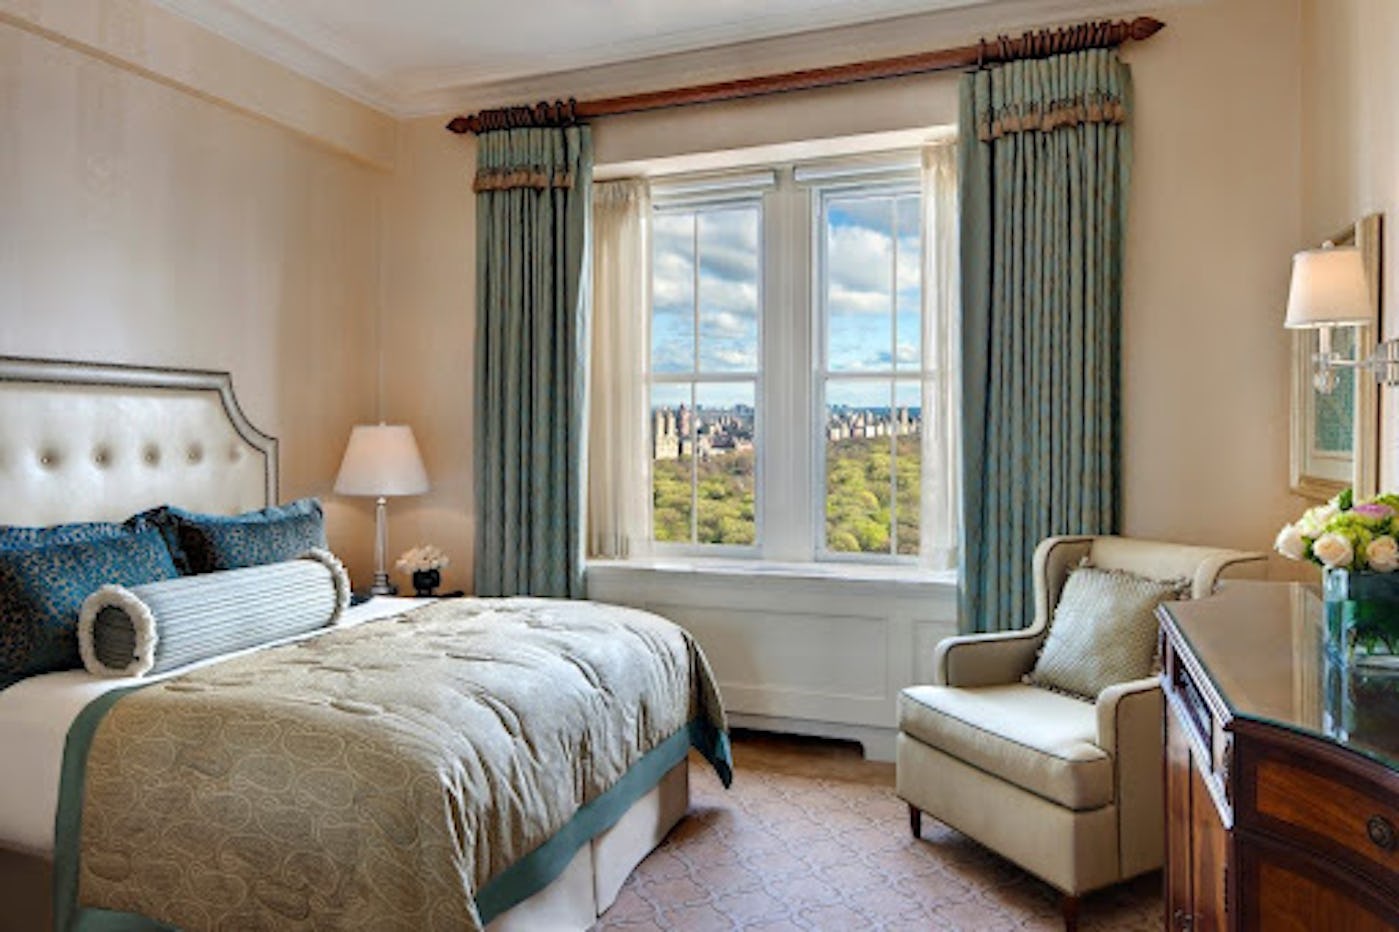 Book A Stay At The Upper East Side’s Most Luxurious Landmark, The Pierre